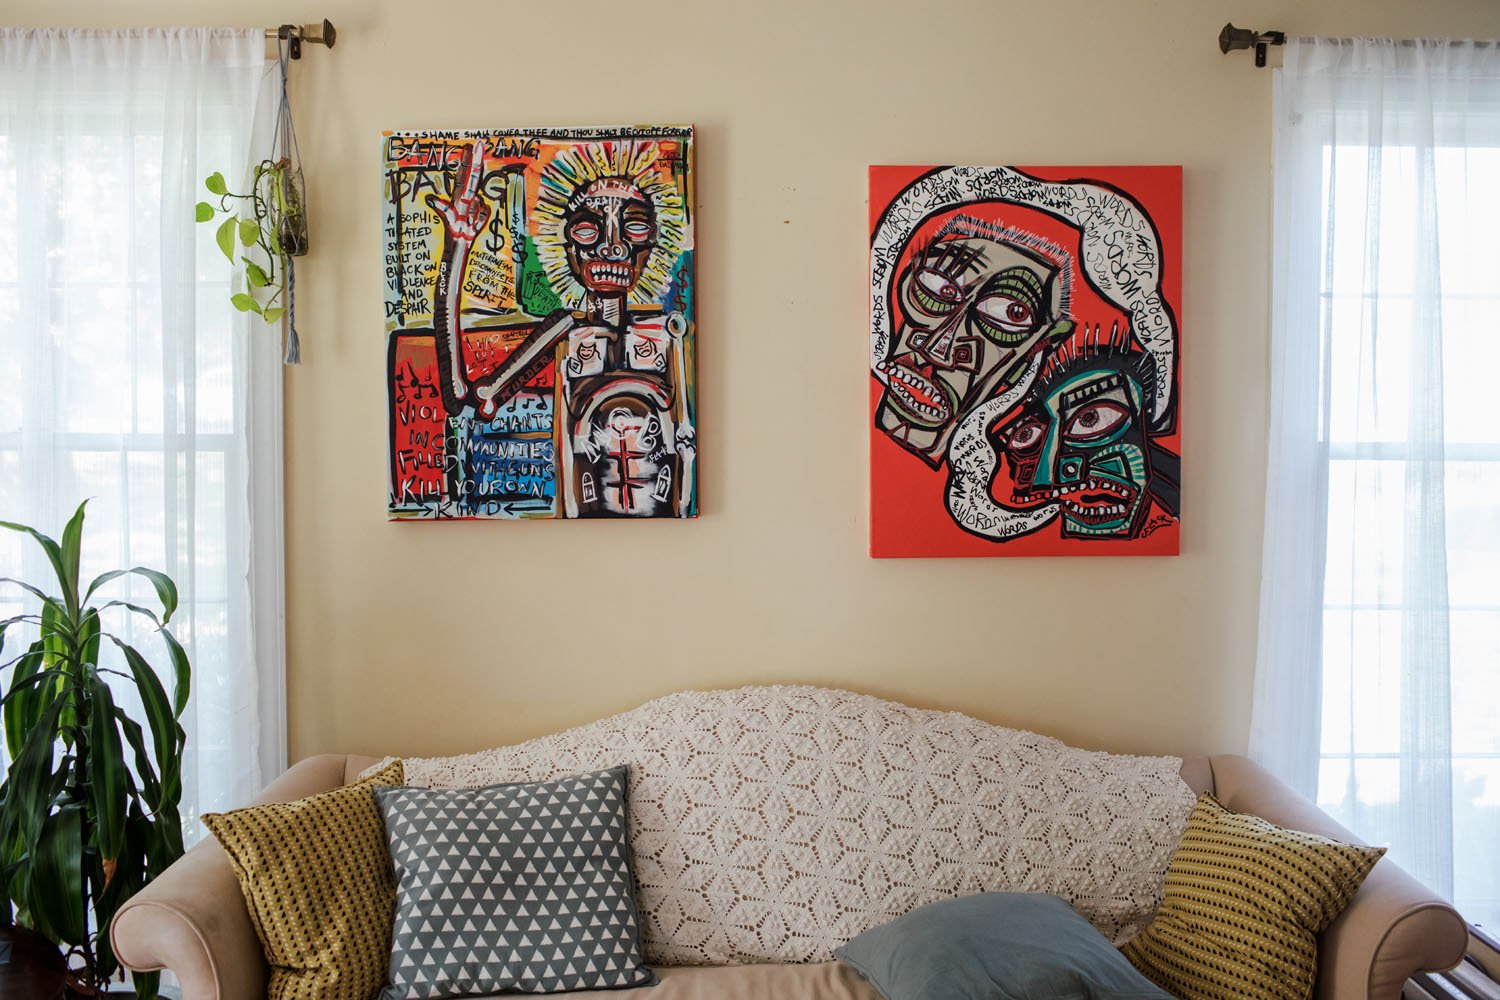 Jason Flack's paintings on display in the living room portion of the house gallery.